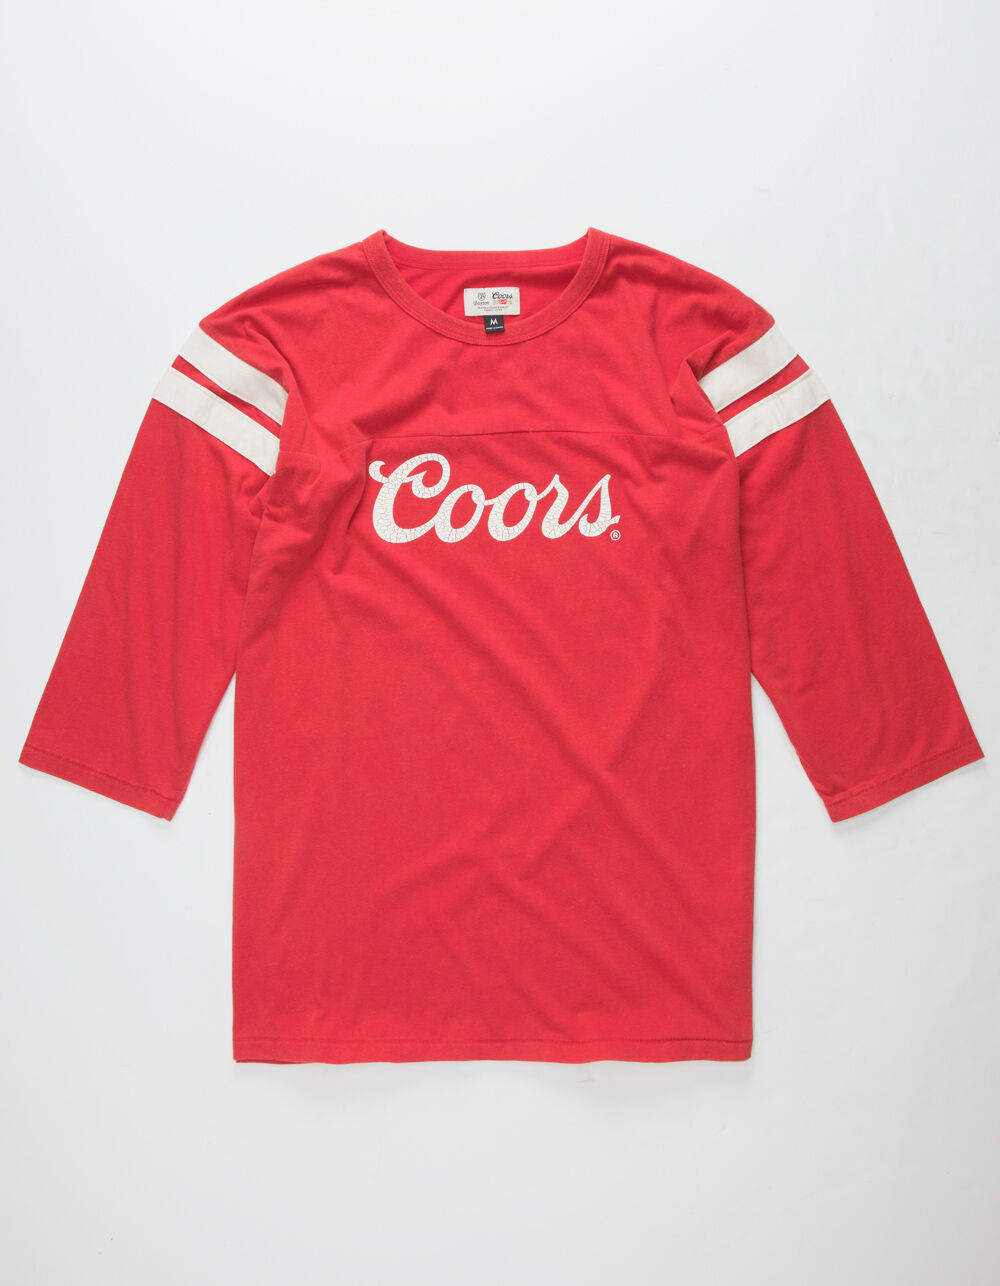 BRIXTON x Coors Signature Red Mens T-Shirt image number 0